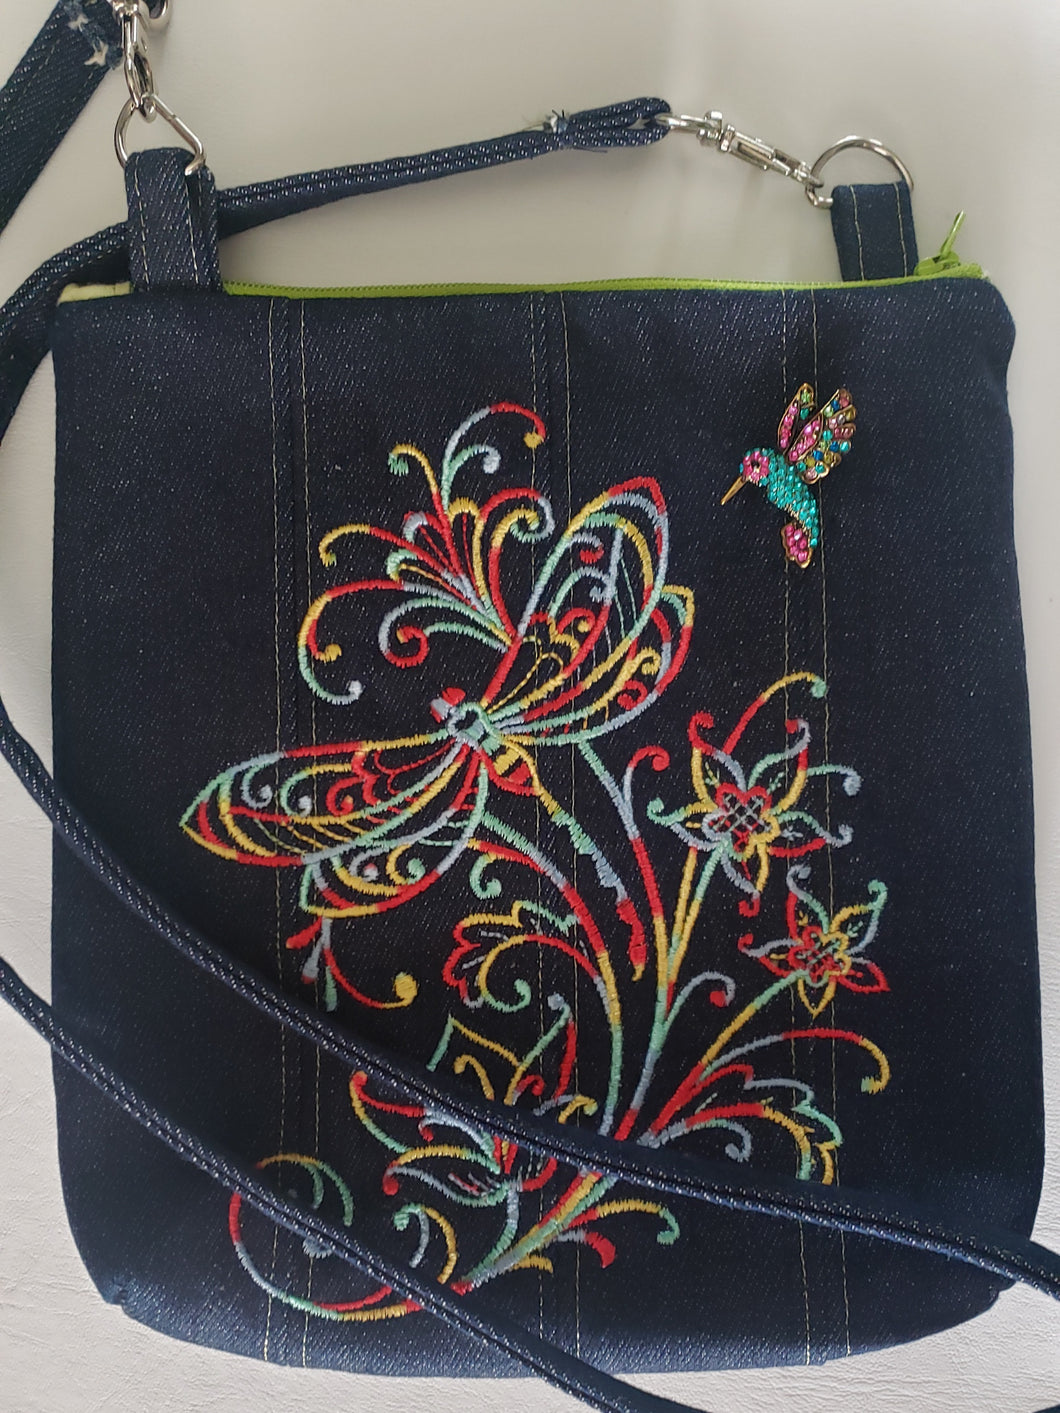 Dragonfly Crossover bag | The Melon Patch by Deb™